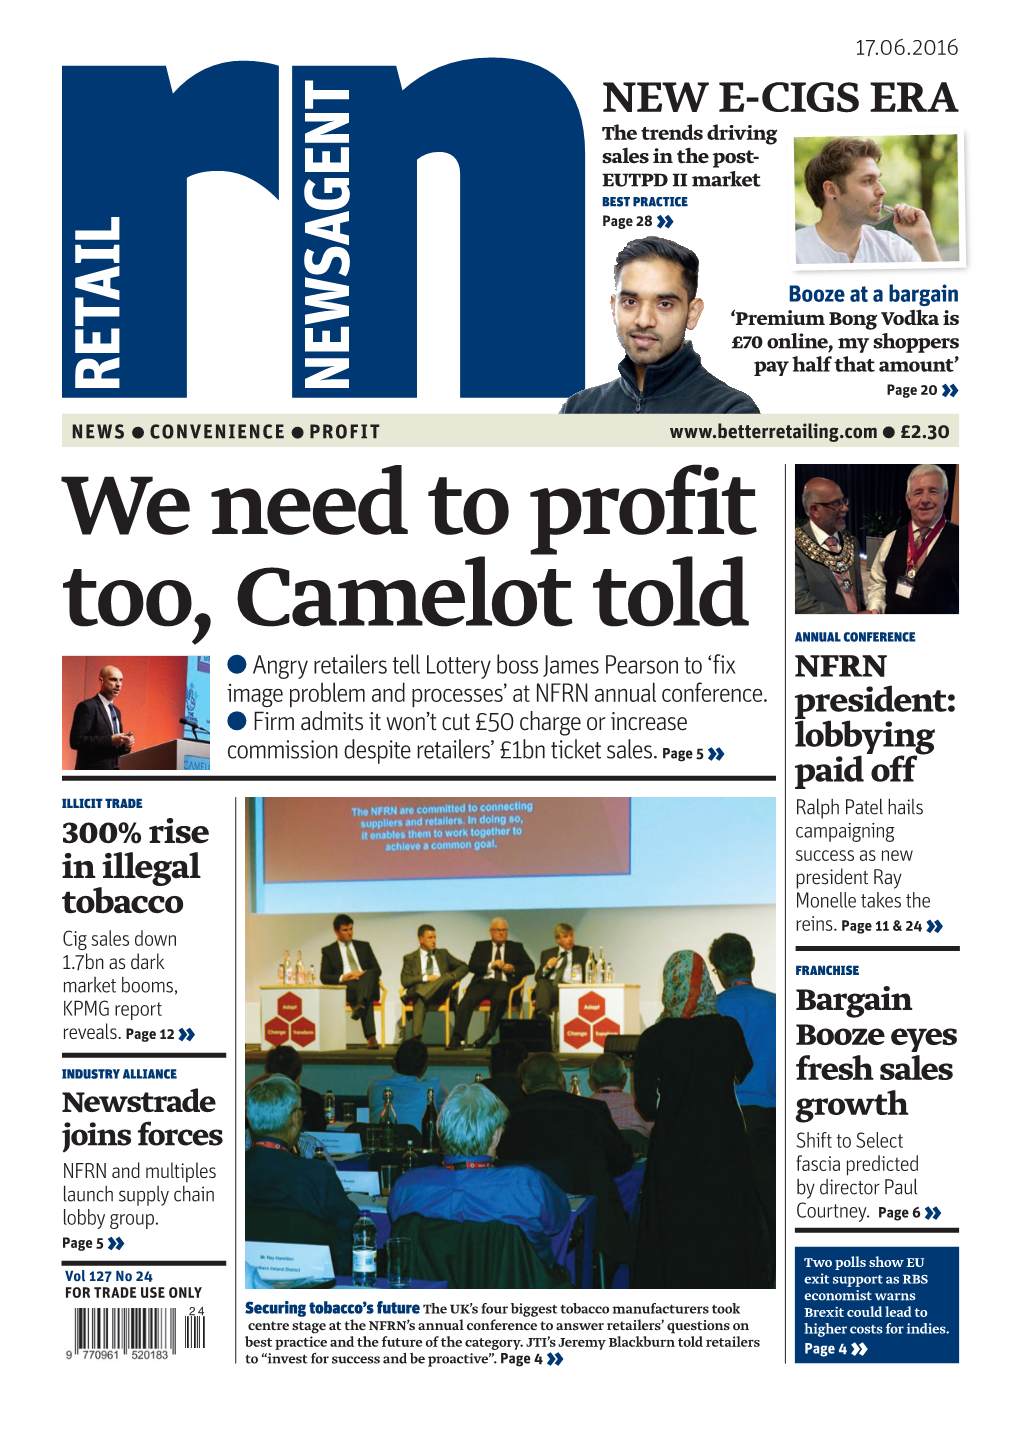 We Need to Profit Too, Camelot Told